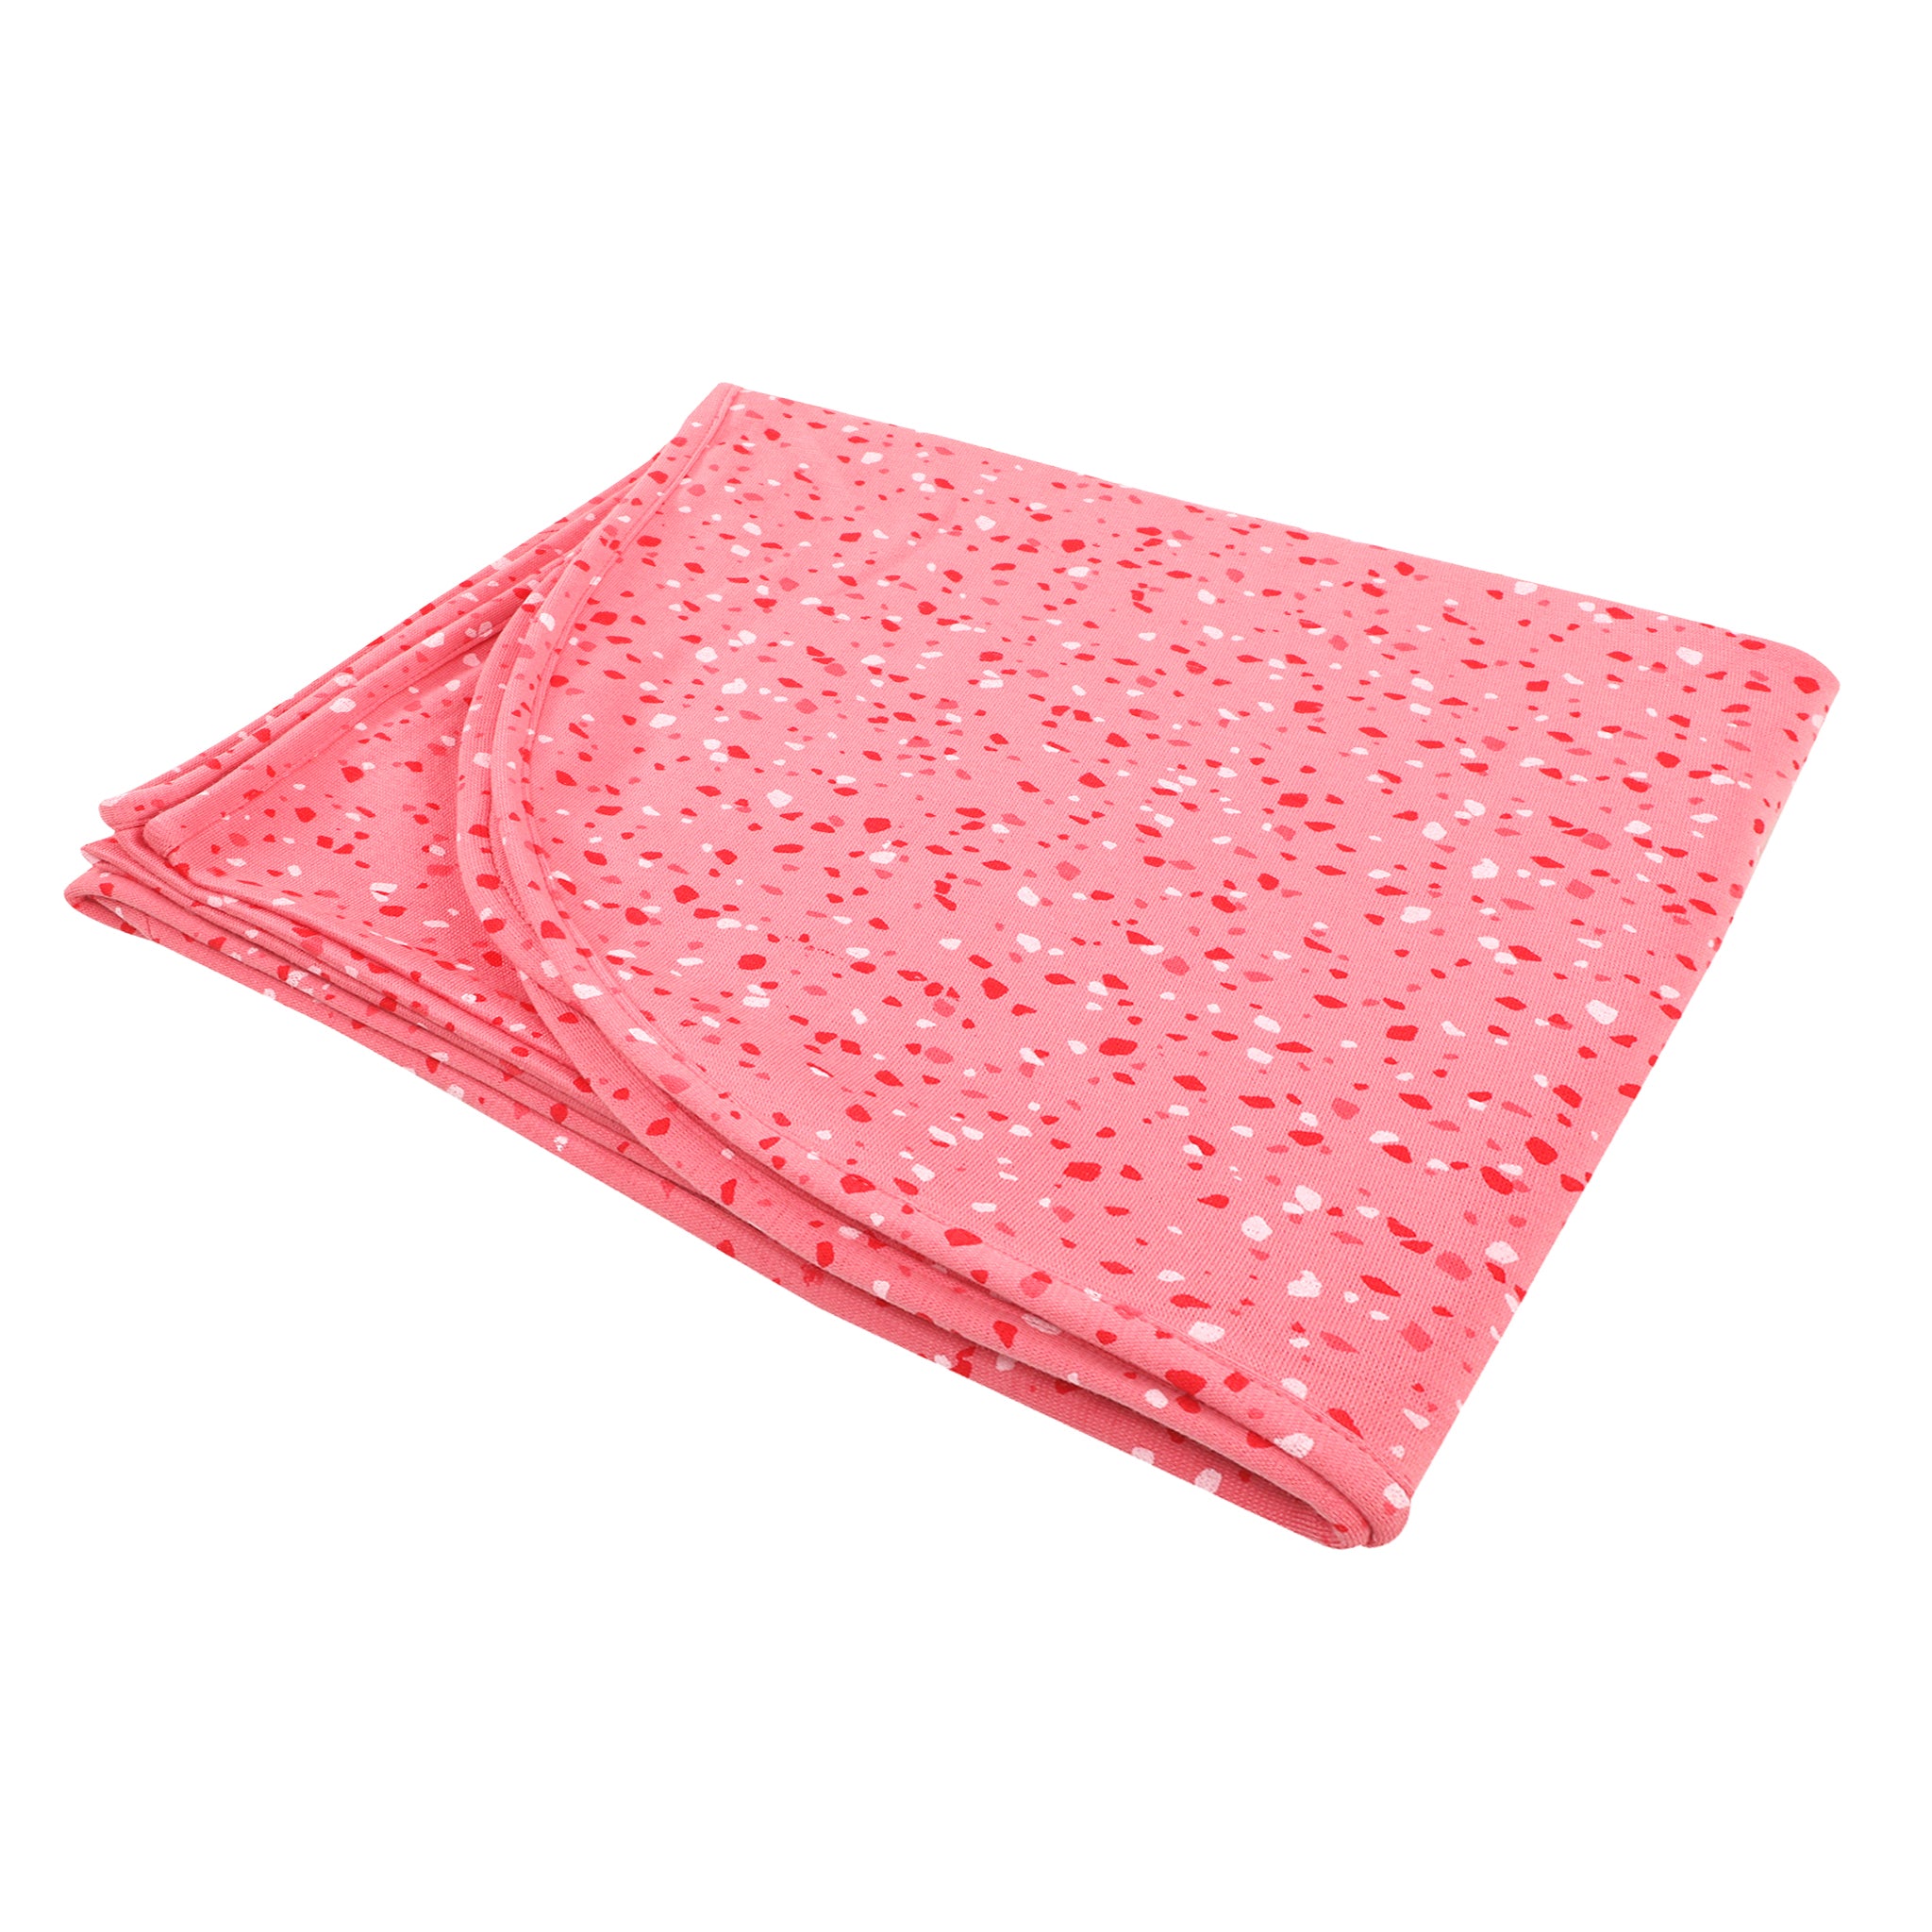 DESSERT ROSE TERRAZZO STRETCHY JERSEY SWADDLE BLANKET